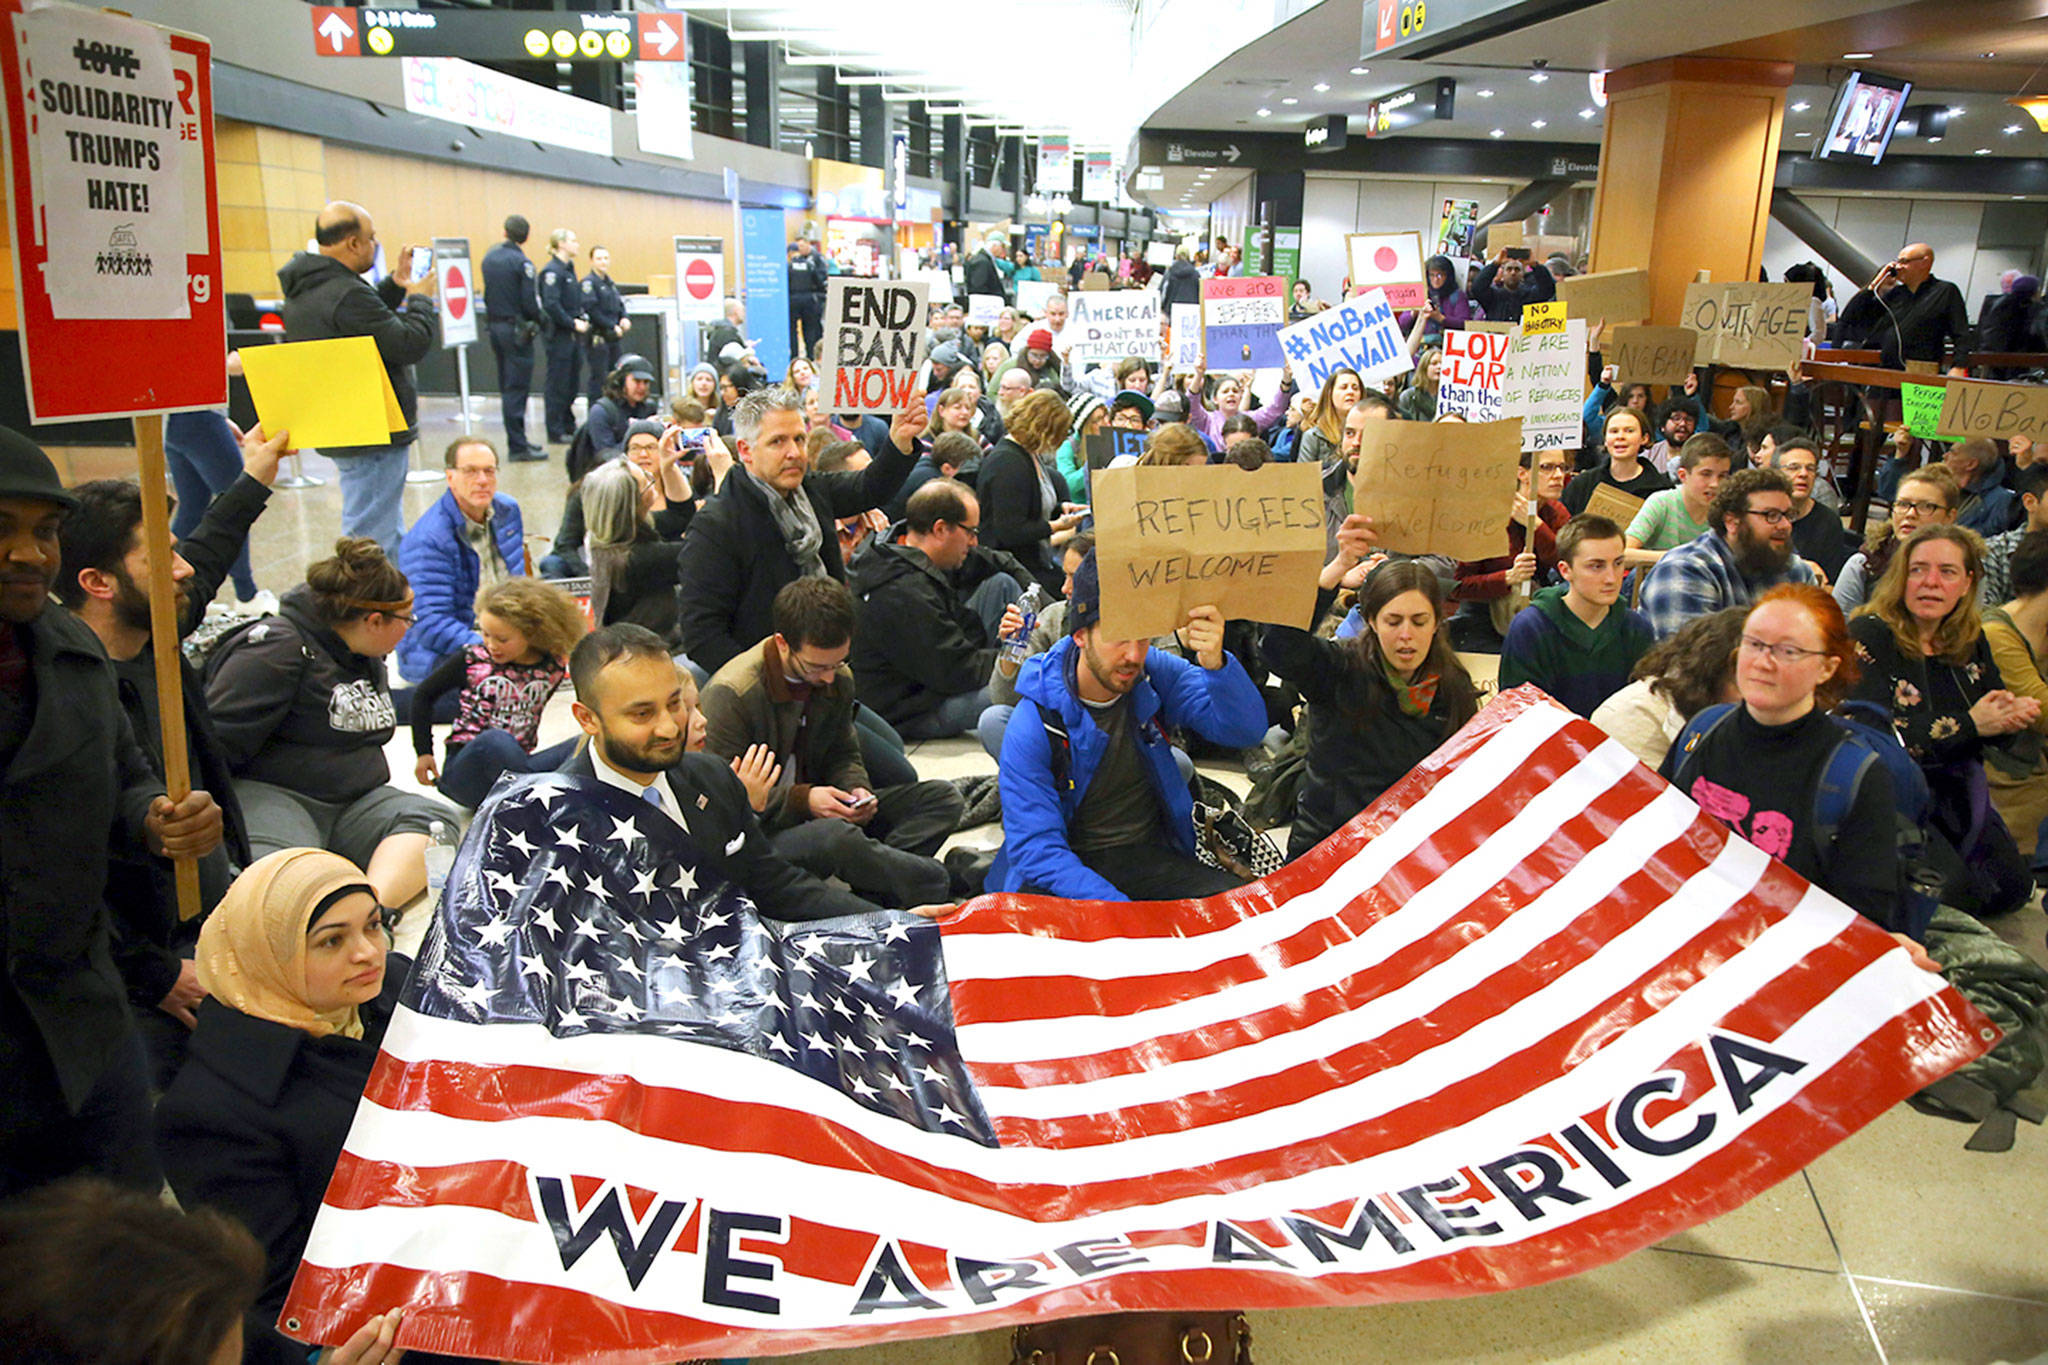 In this Jan. 28, 2017 photo, demonstrators sit down in the concourse and hold a sign that reads “We are America,” as more than 1,000 people gather at Seattle-Tacoma International Airport to protest President Donald Trump’s order that restricts immigration to the U.S. (Genna Martin/seattlepi.com via AP, File)